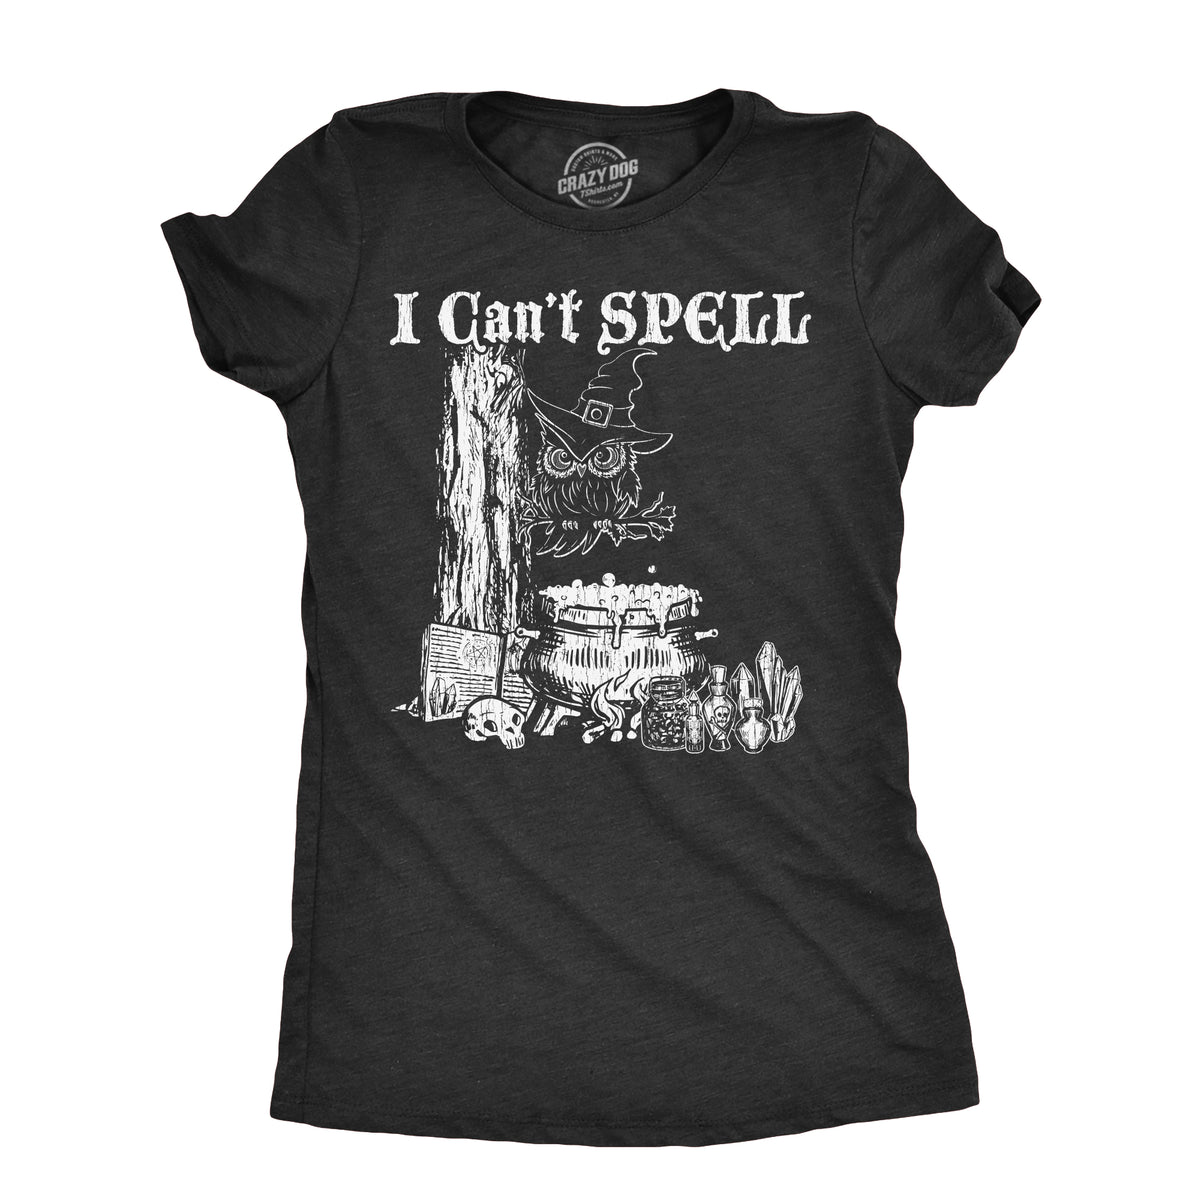 Funny Heather Black - SPELL I Cant Spell Womens T Shirt Nerdy Halloween sarcastic Tee